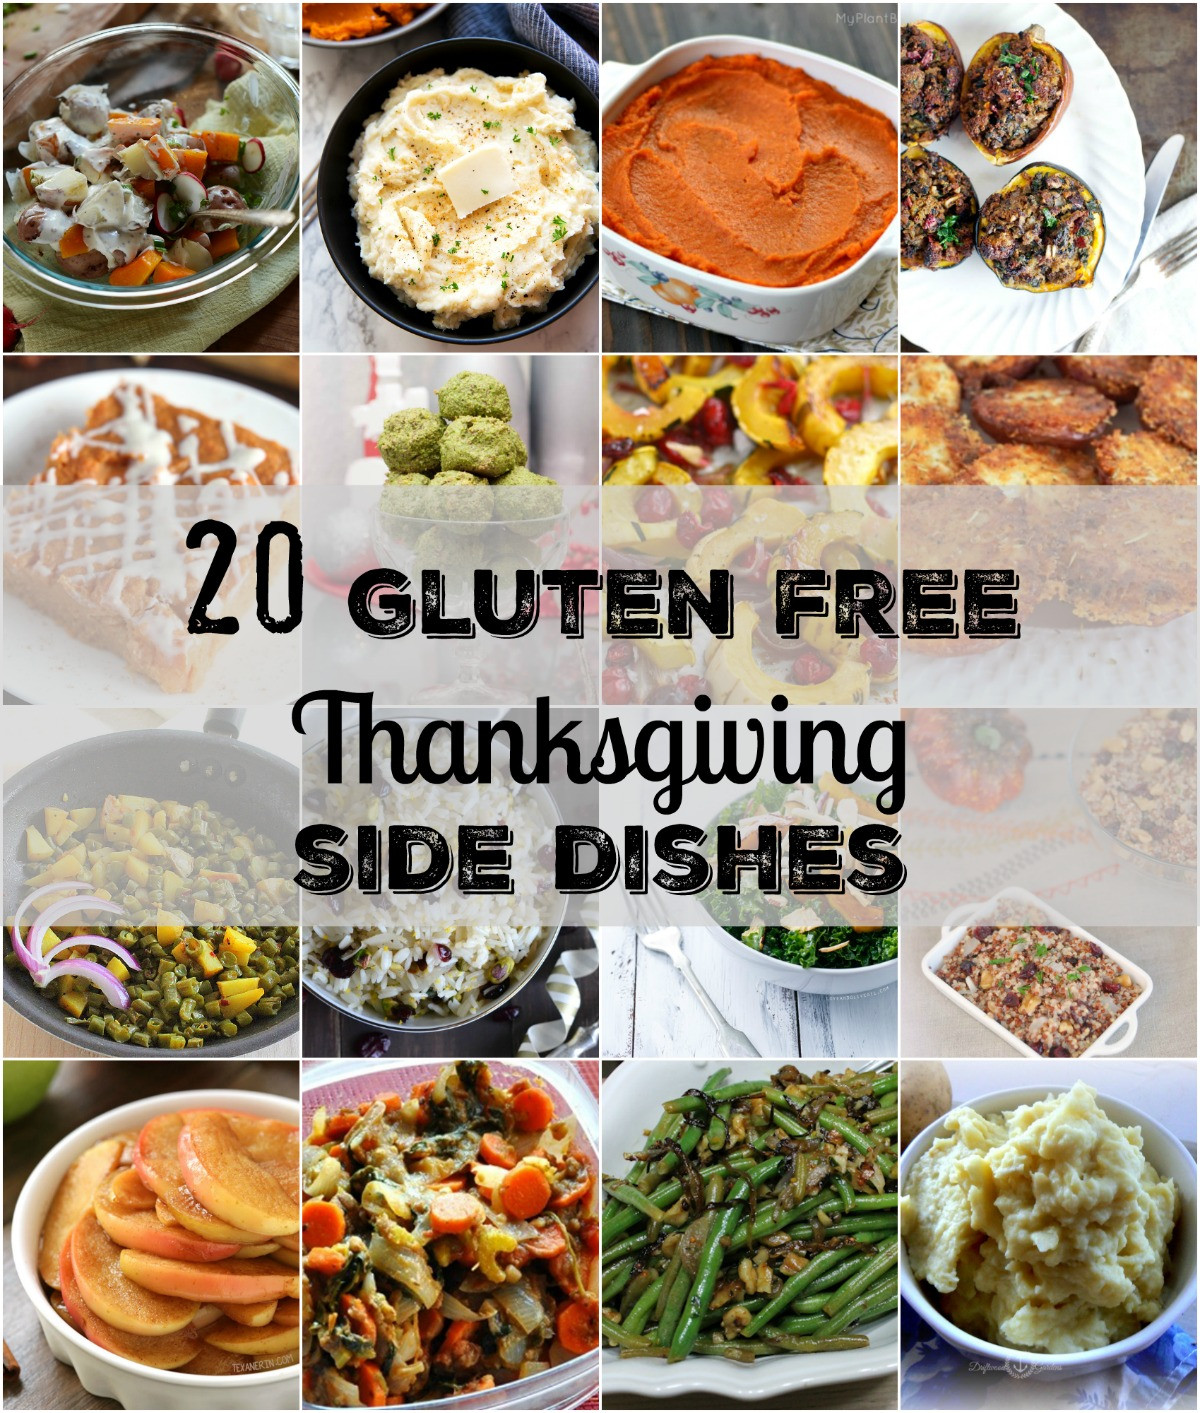 Gluten Free Side Dishes
 20 Gluten Free Thanksgiving Side Dishes